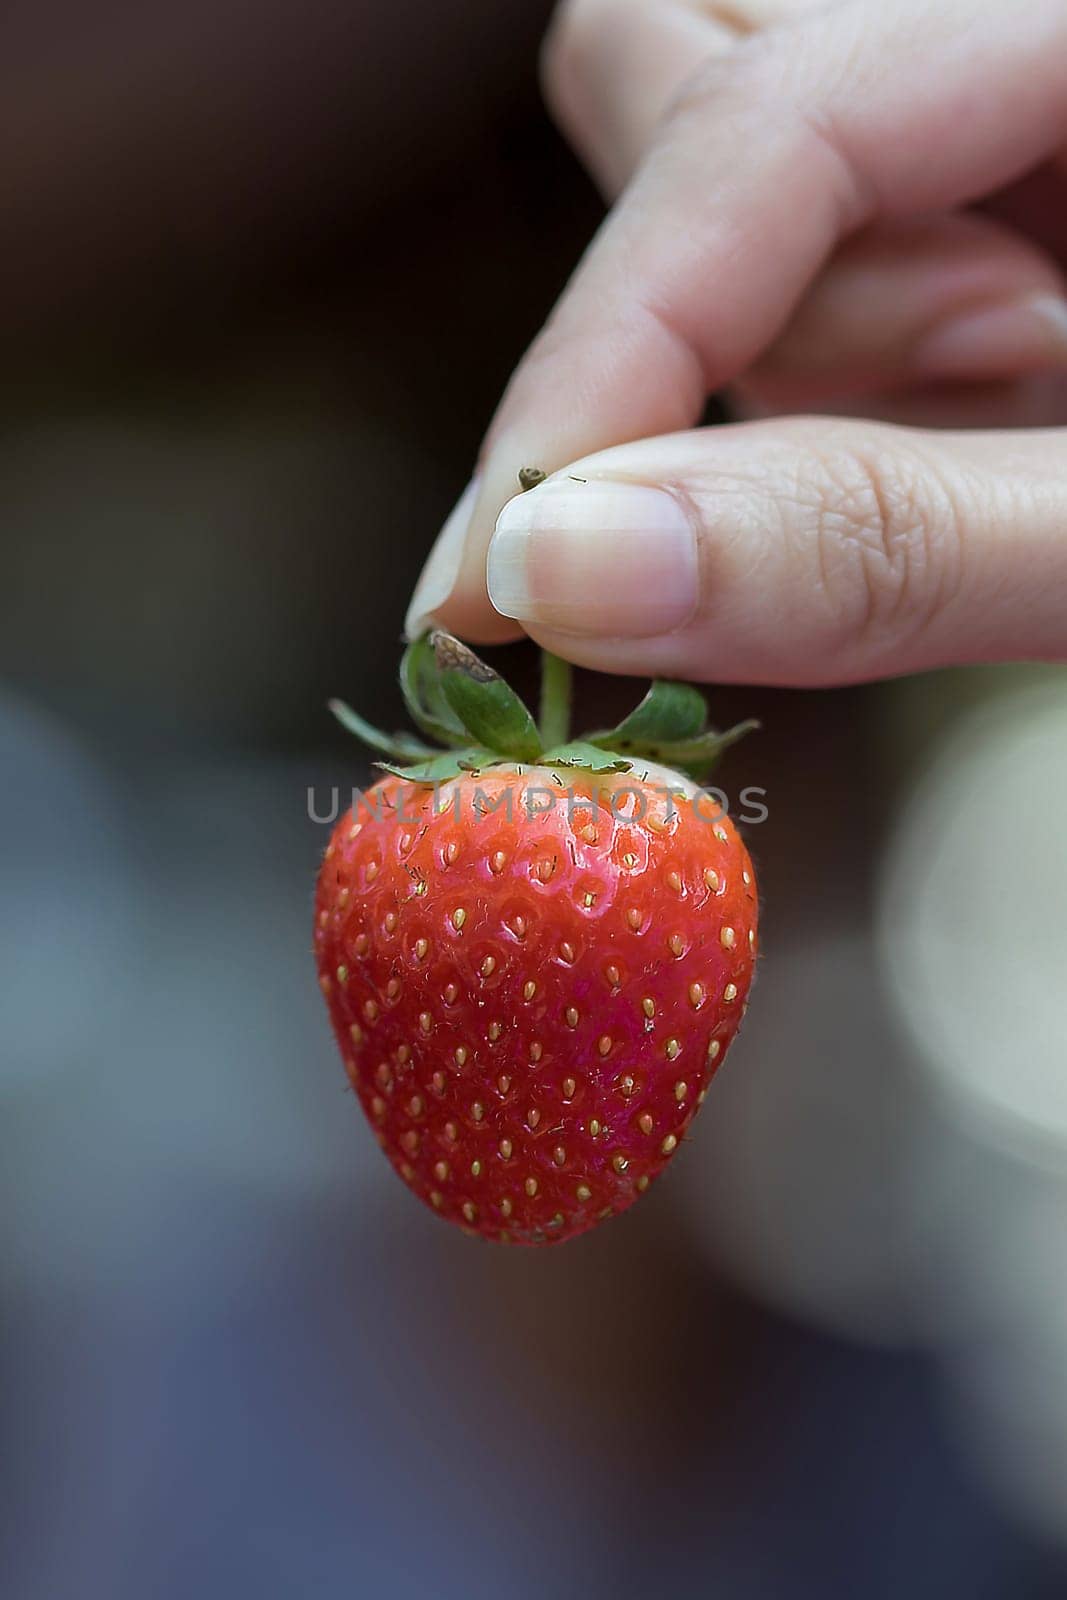 Fingers woman holding a strawberry red berries to eat. by Puripatt